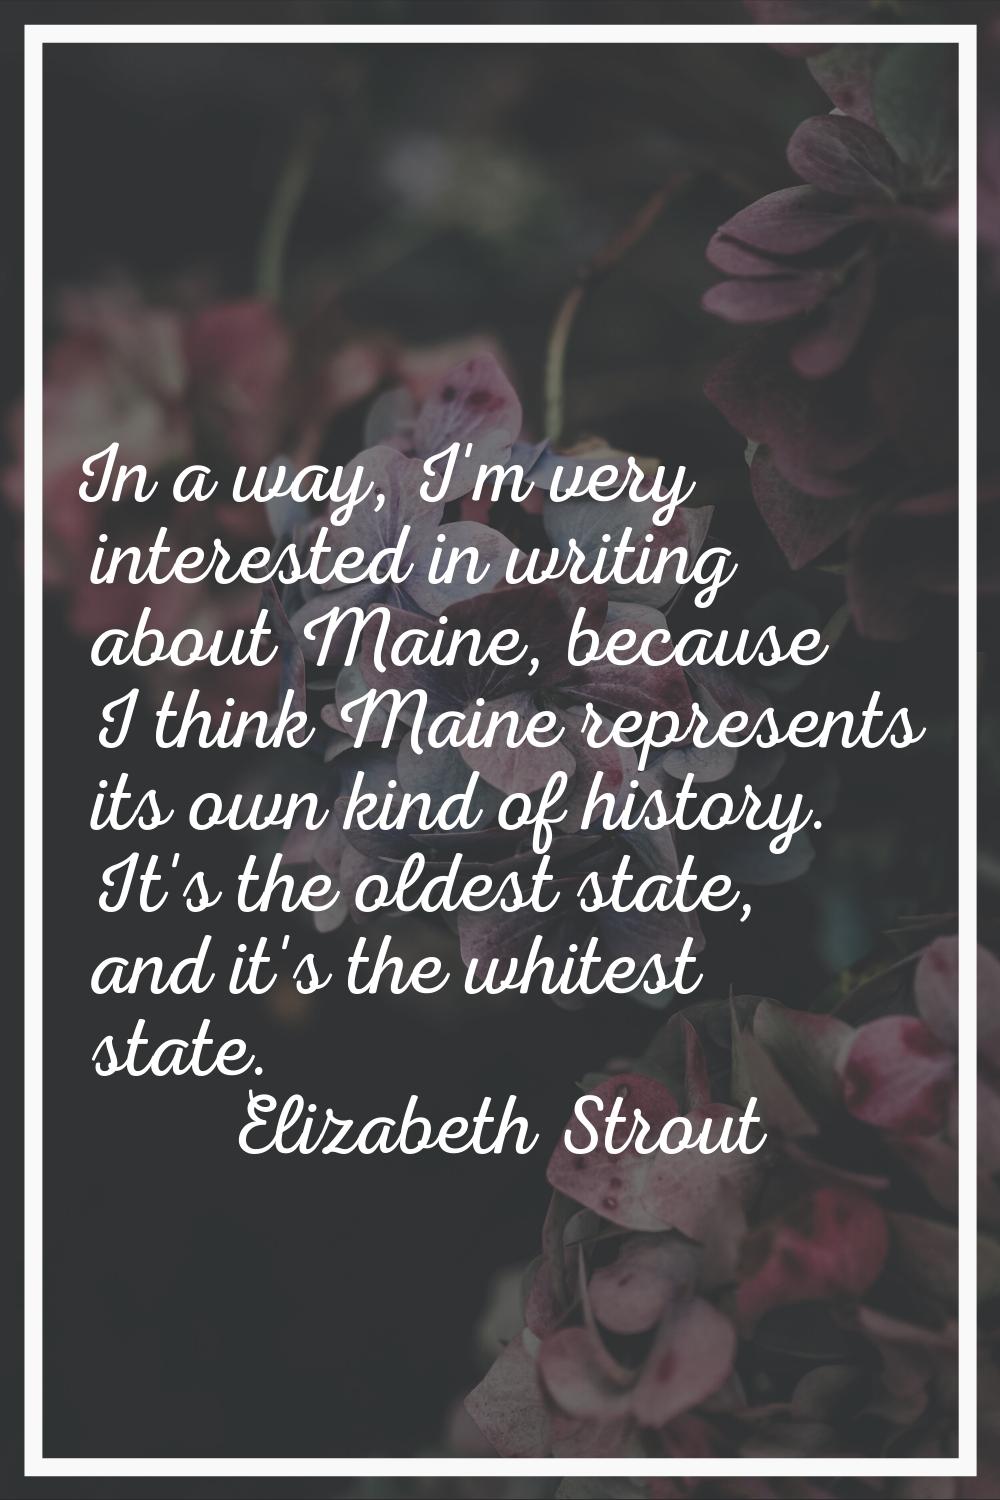 In a way, I'm very interested in writing about Maine, because I think Maine represents its own kind